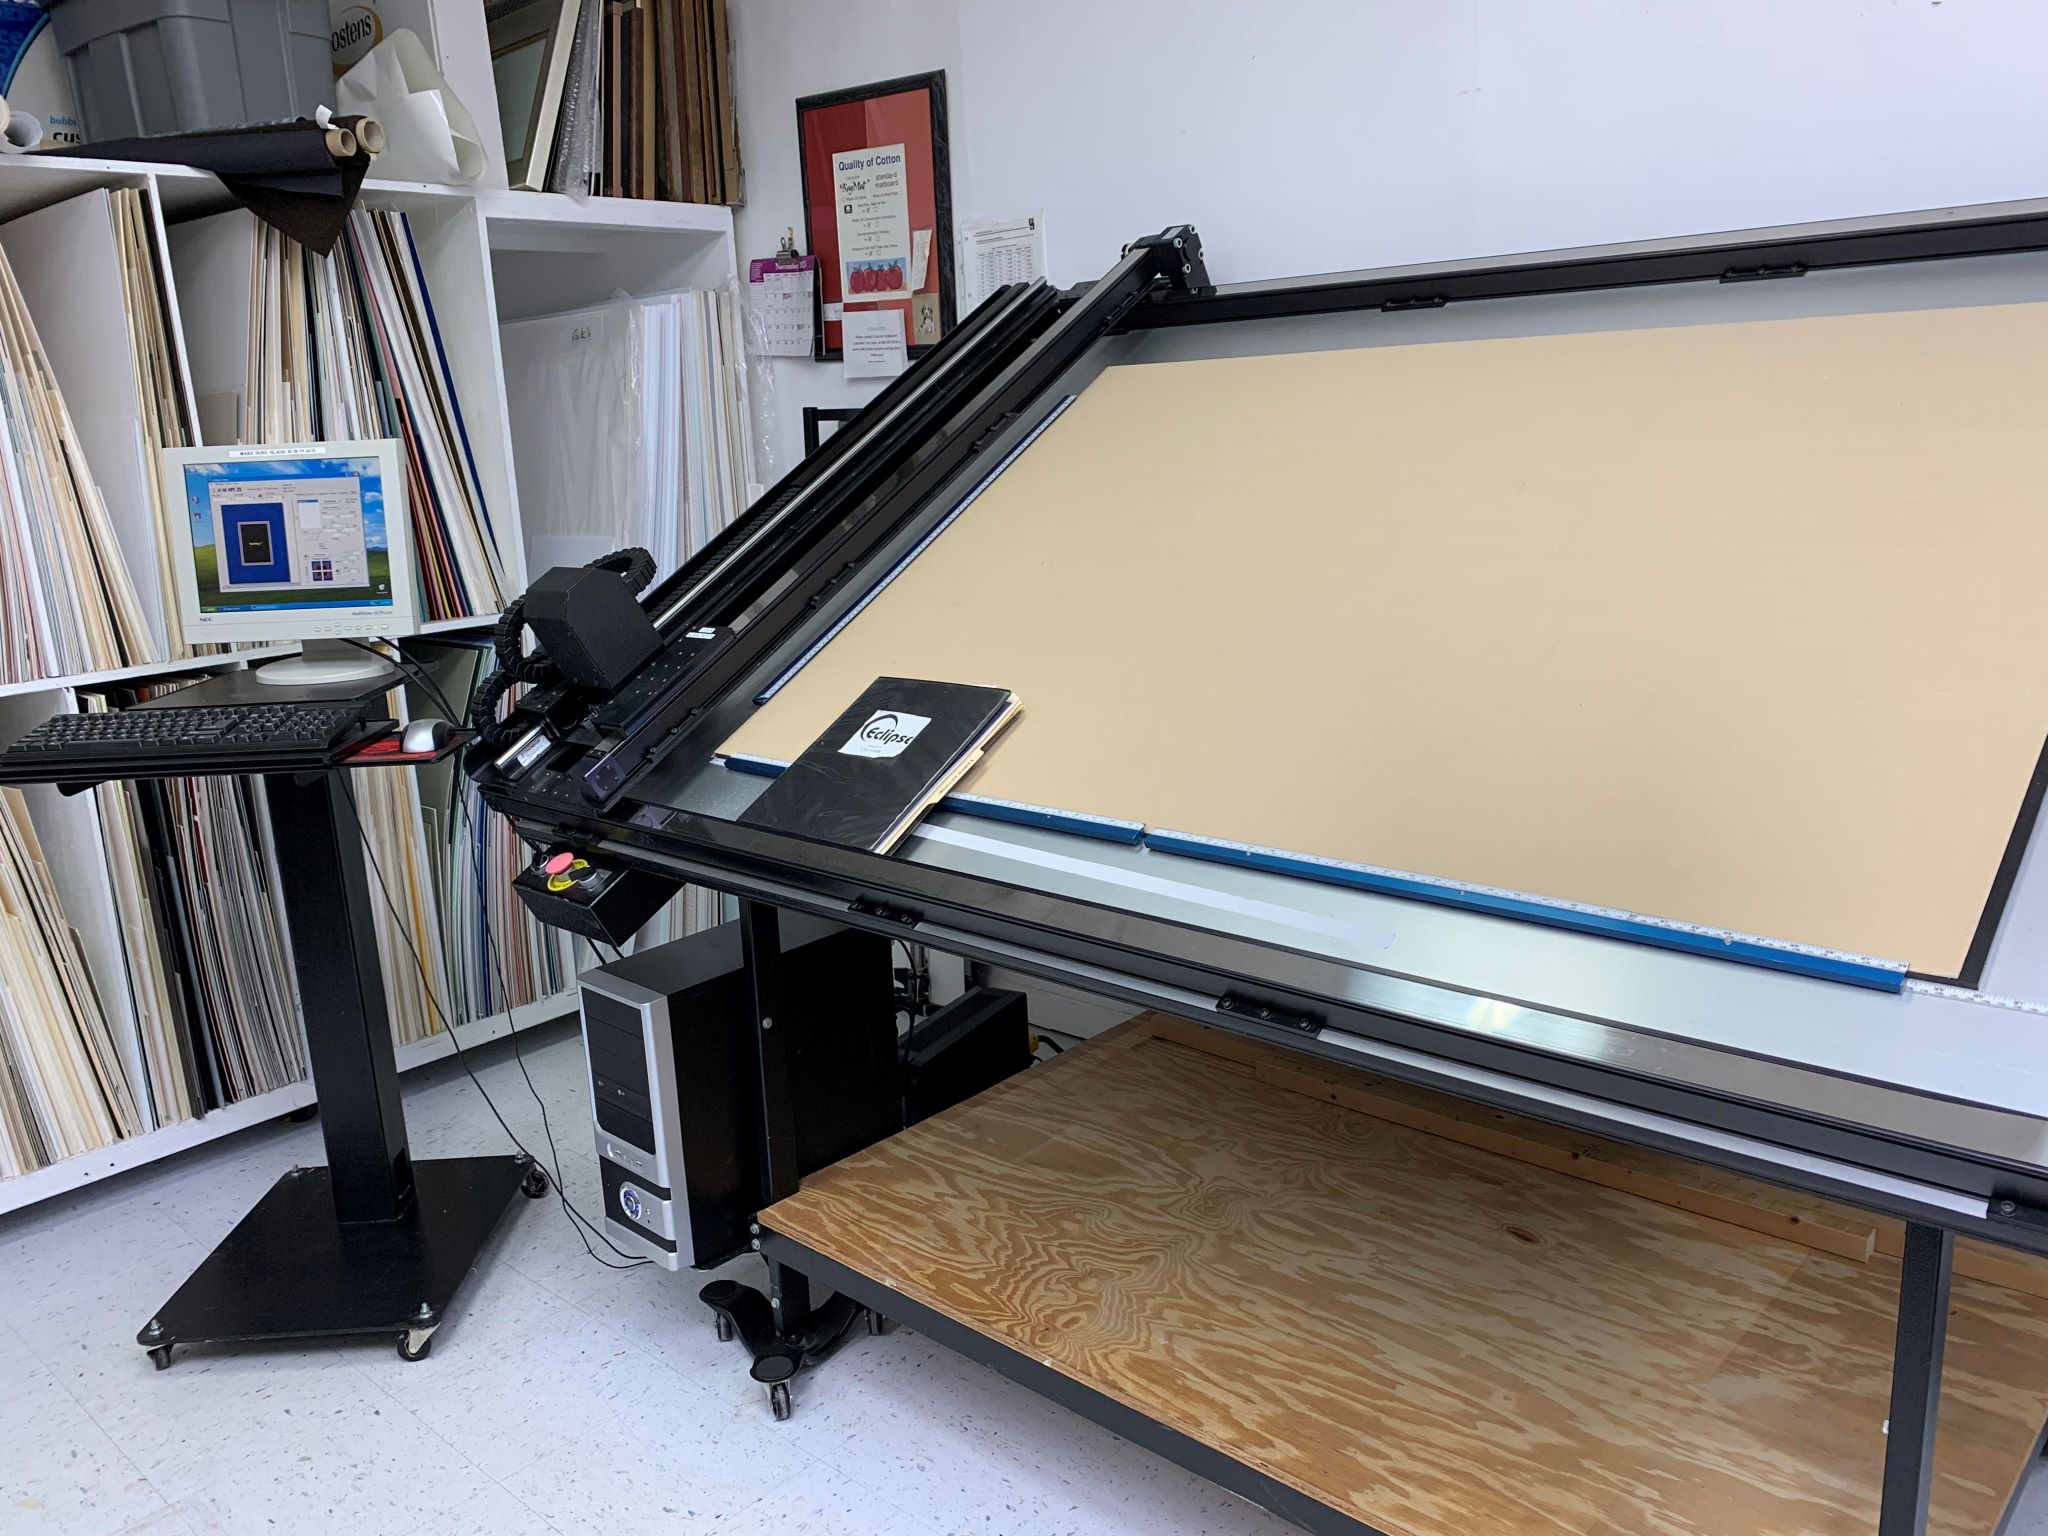 Picture Framing Equipment: Eclipse CMC XL Computerized Mat Cutter & Print Drying Rack For Artwork (Used) Item # UE-040124A